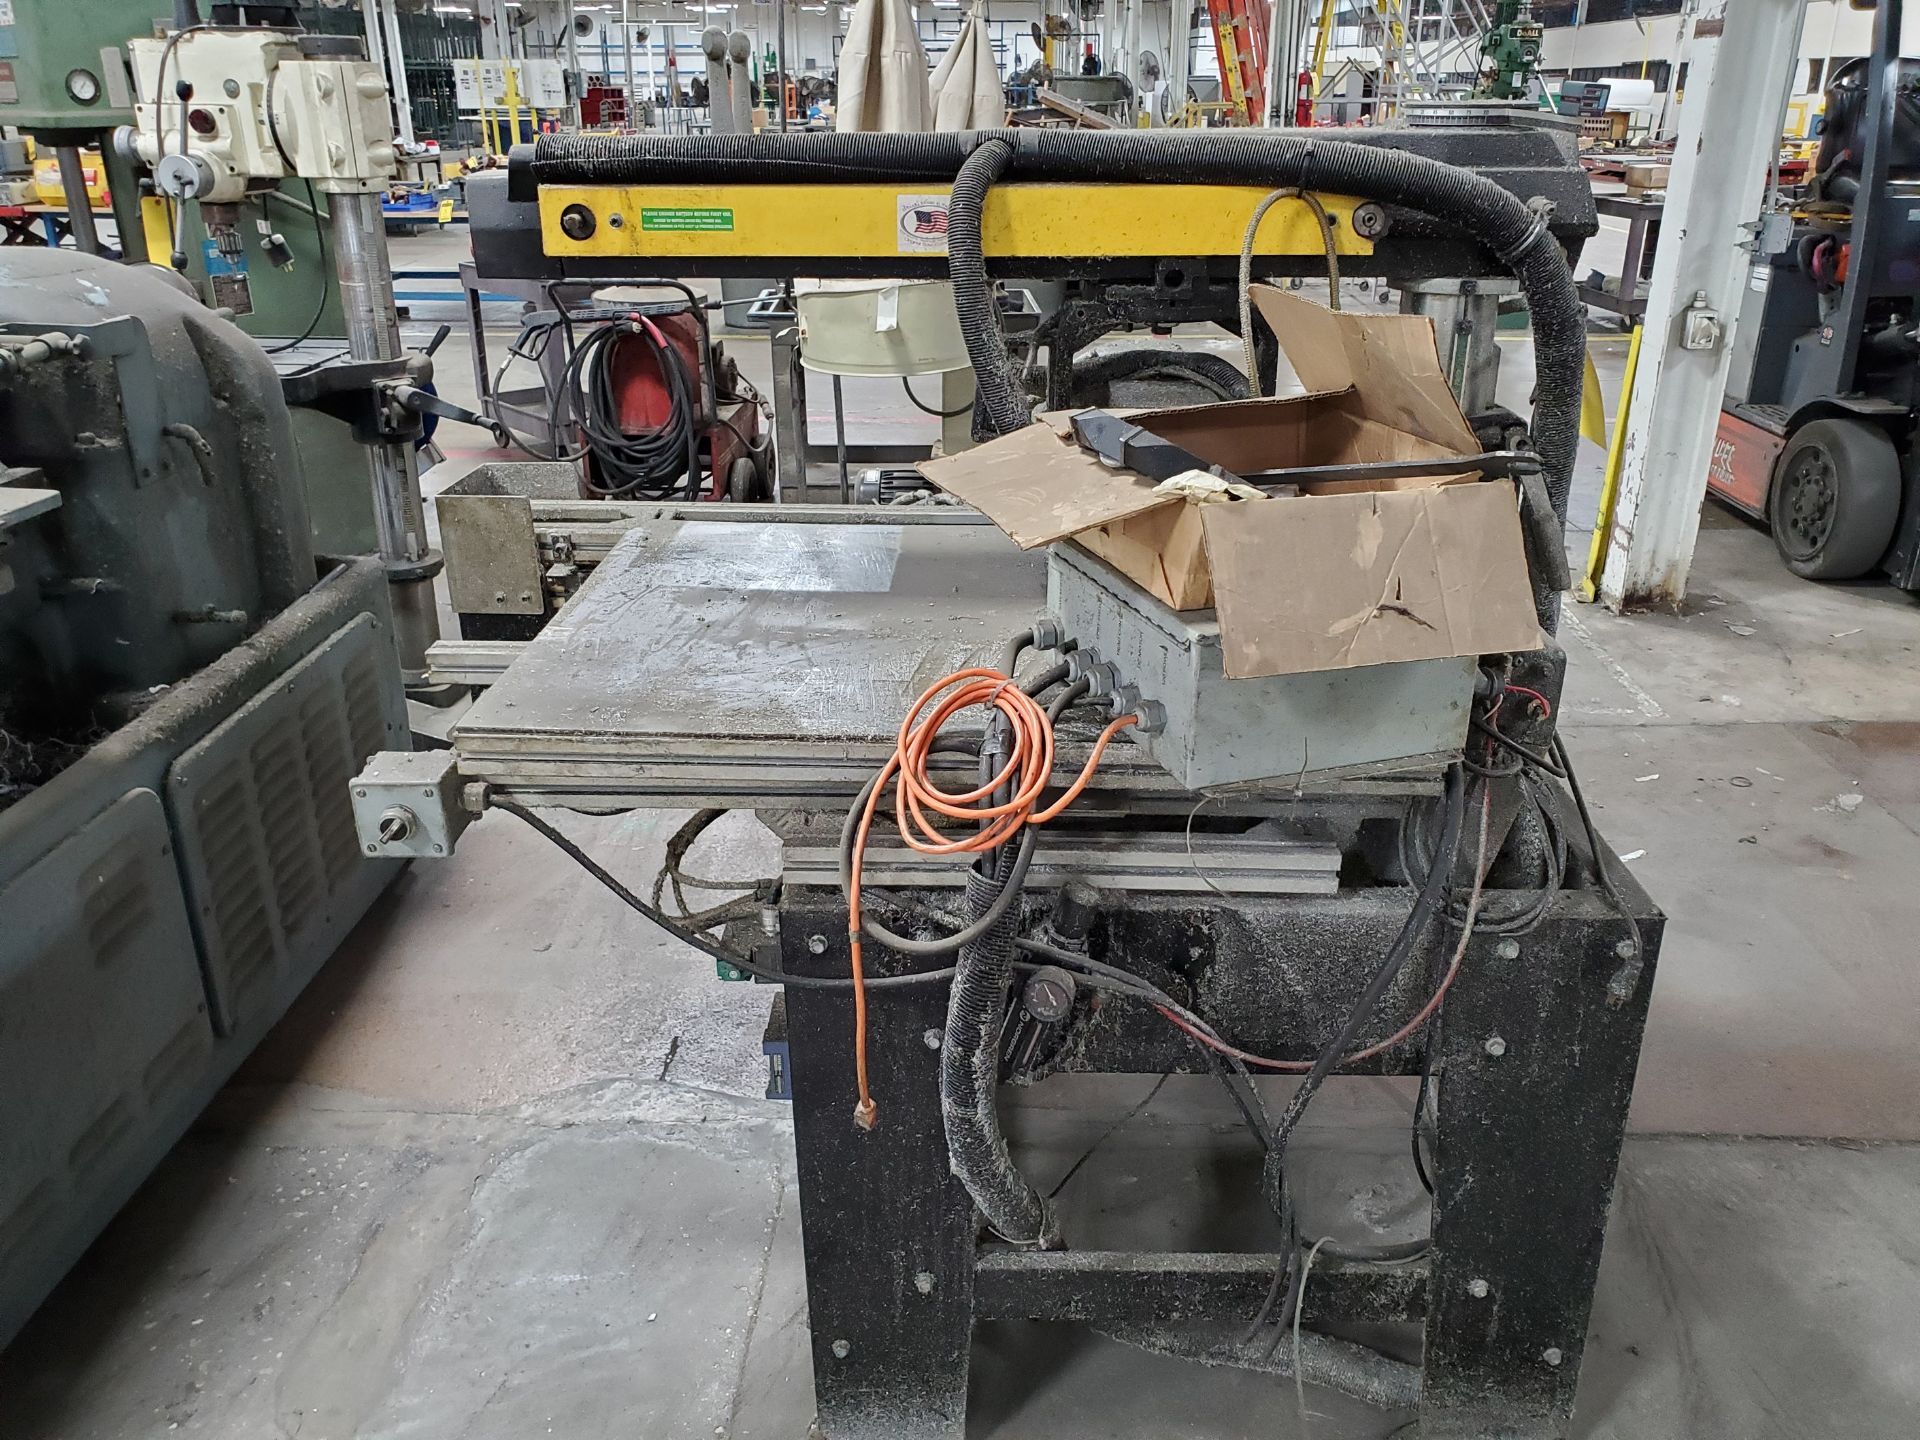 THE ORIGINAL SAW COMPANY METAL CUTTING RADIAL SAW, DUAL GUIDE, WASH SYSTEM, CONTROL BOX, VARIABLE - Image 3 of 10